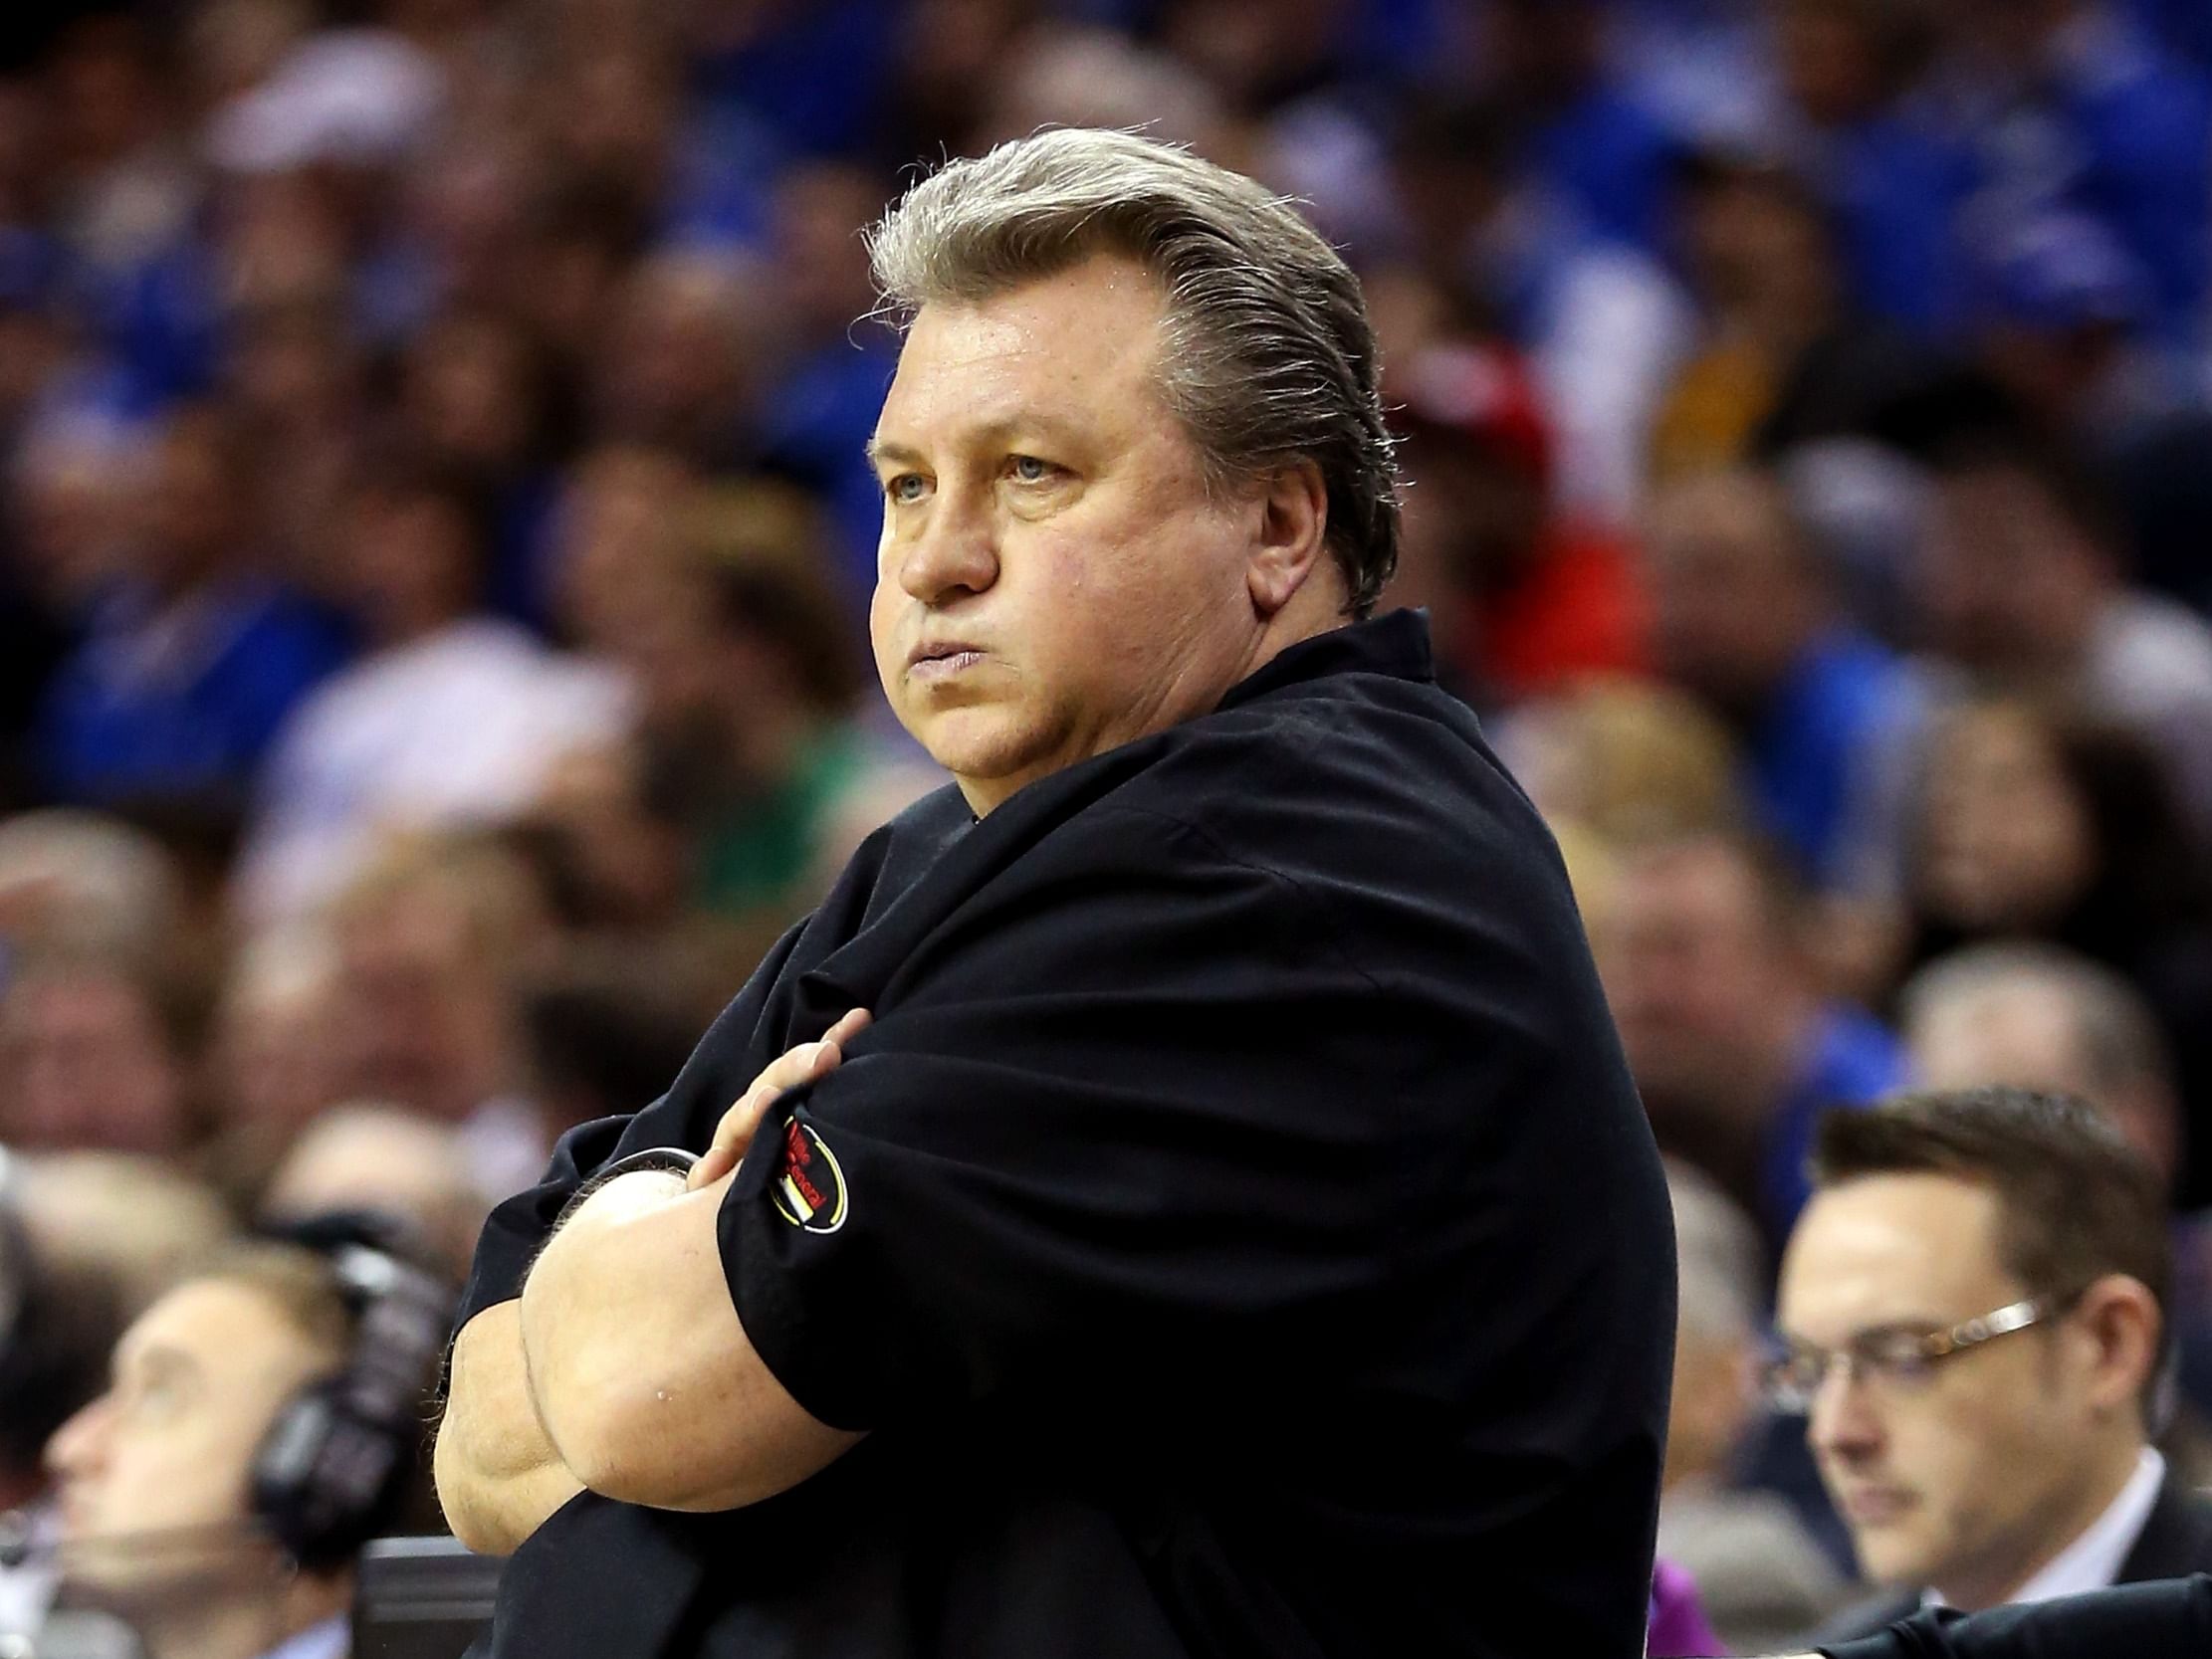 What did Bob Huggins say? Homophobic slur audio controversy explained as radio hosts come under fire